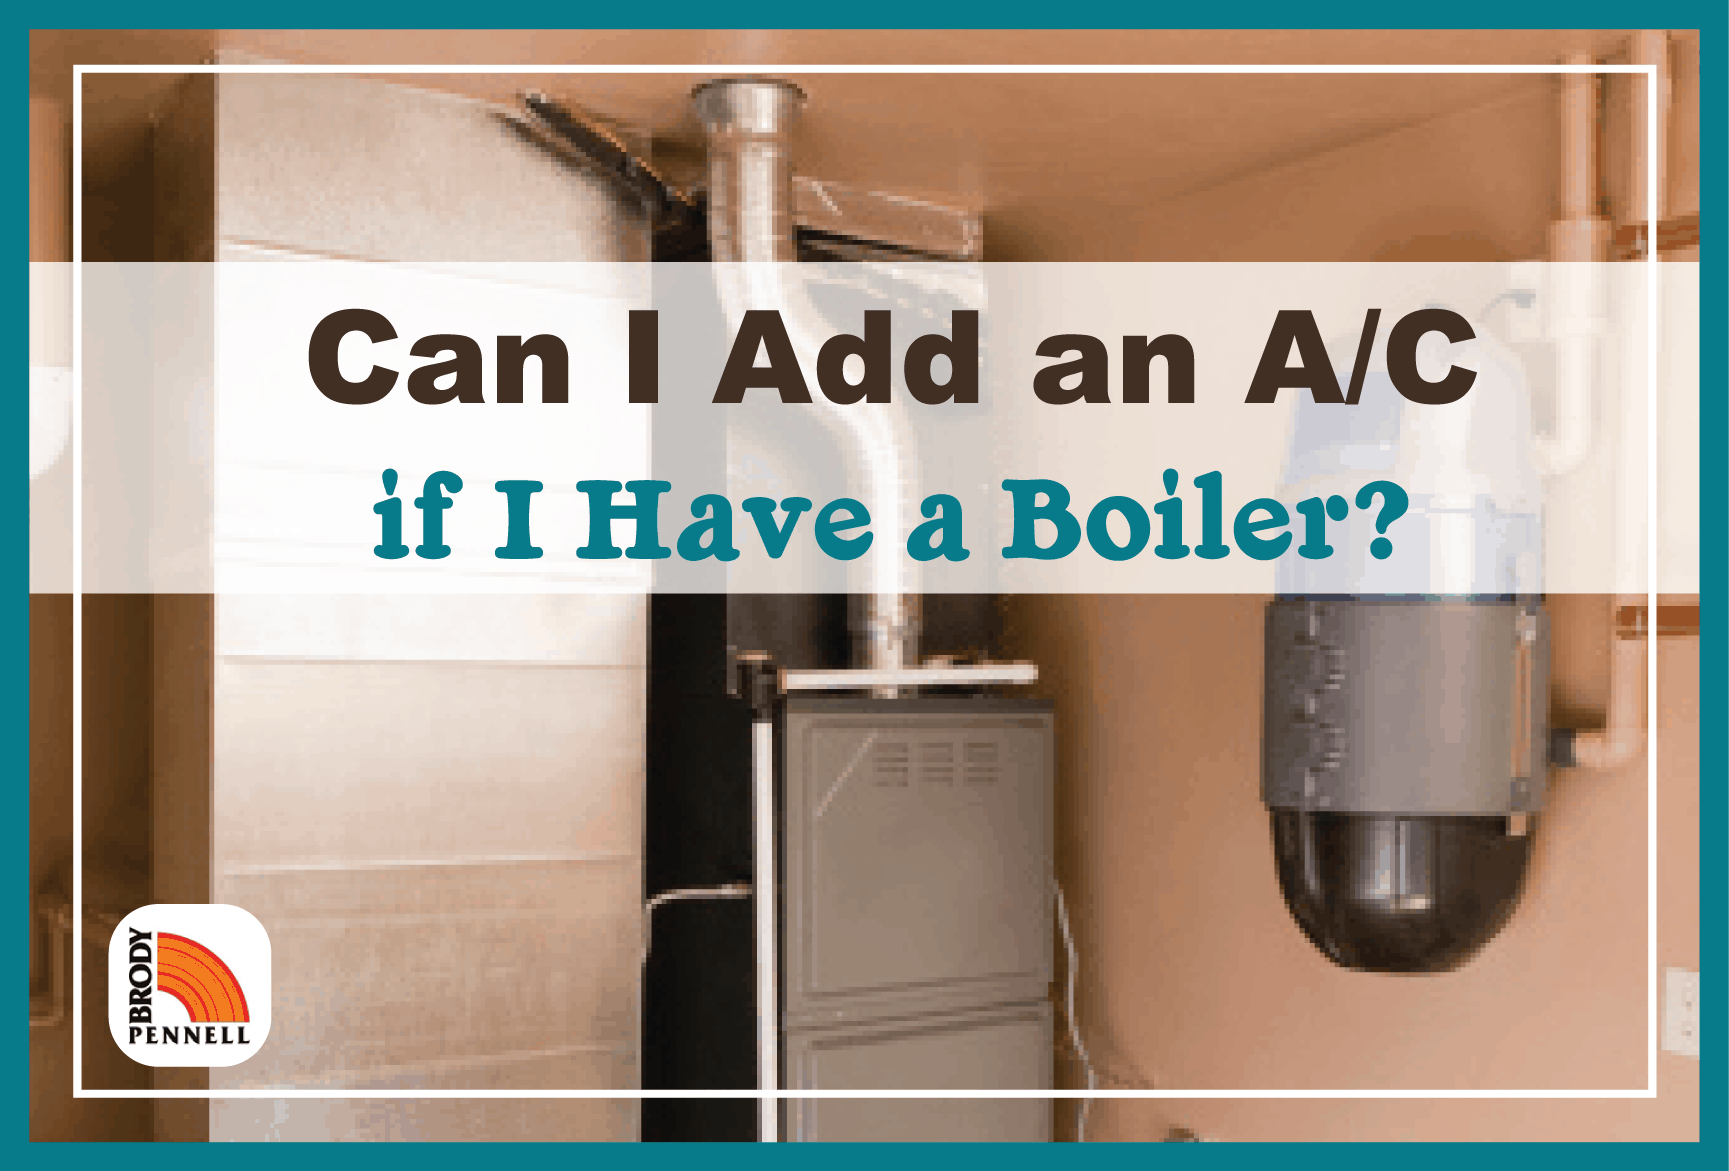 Evolueren Emulatie rundvlees Can I Add an A/C if I Have a Boiler? - Brody Pennell